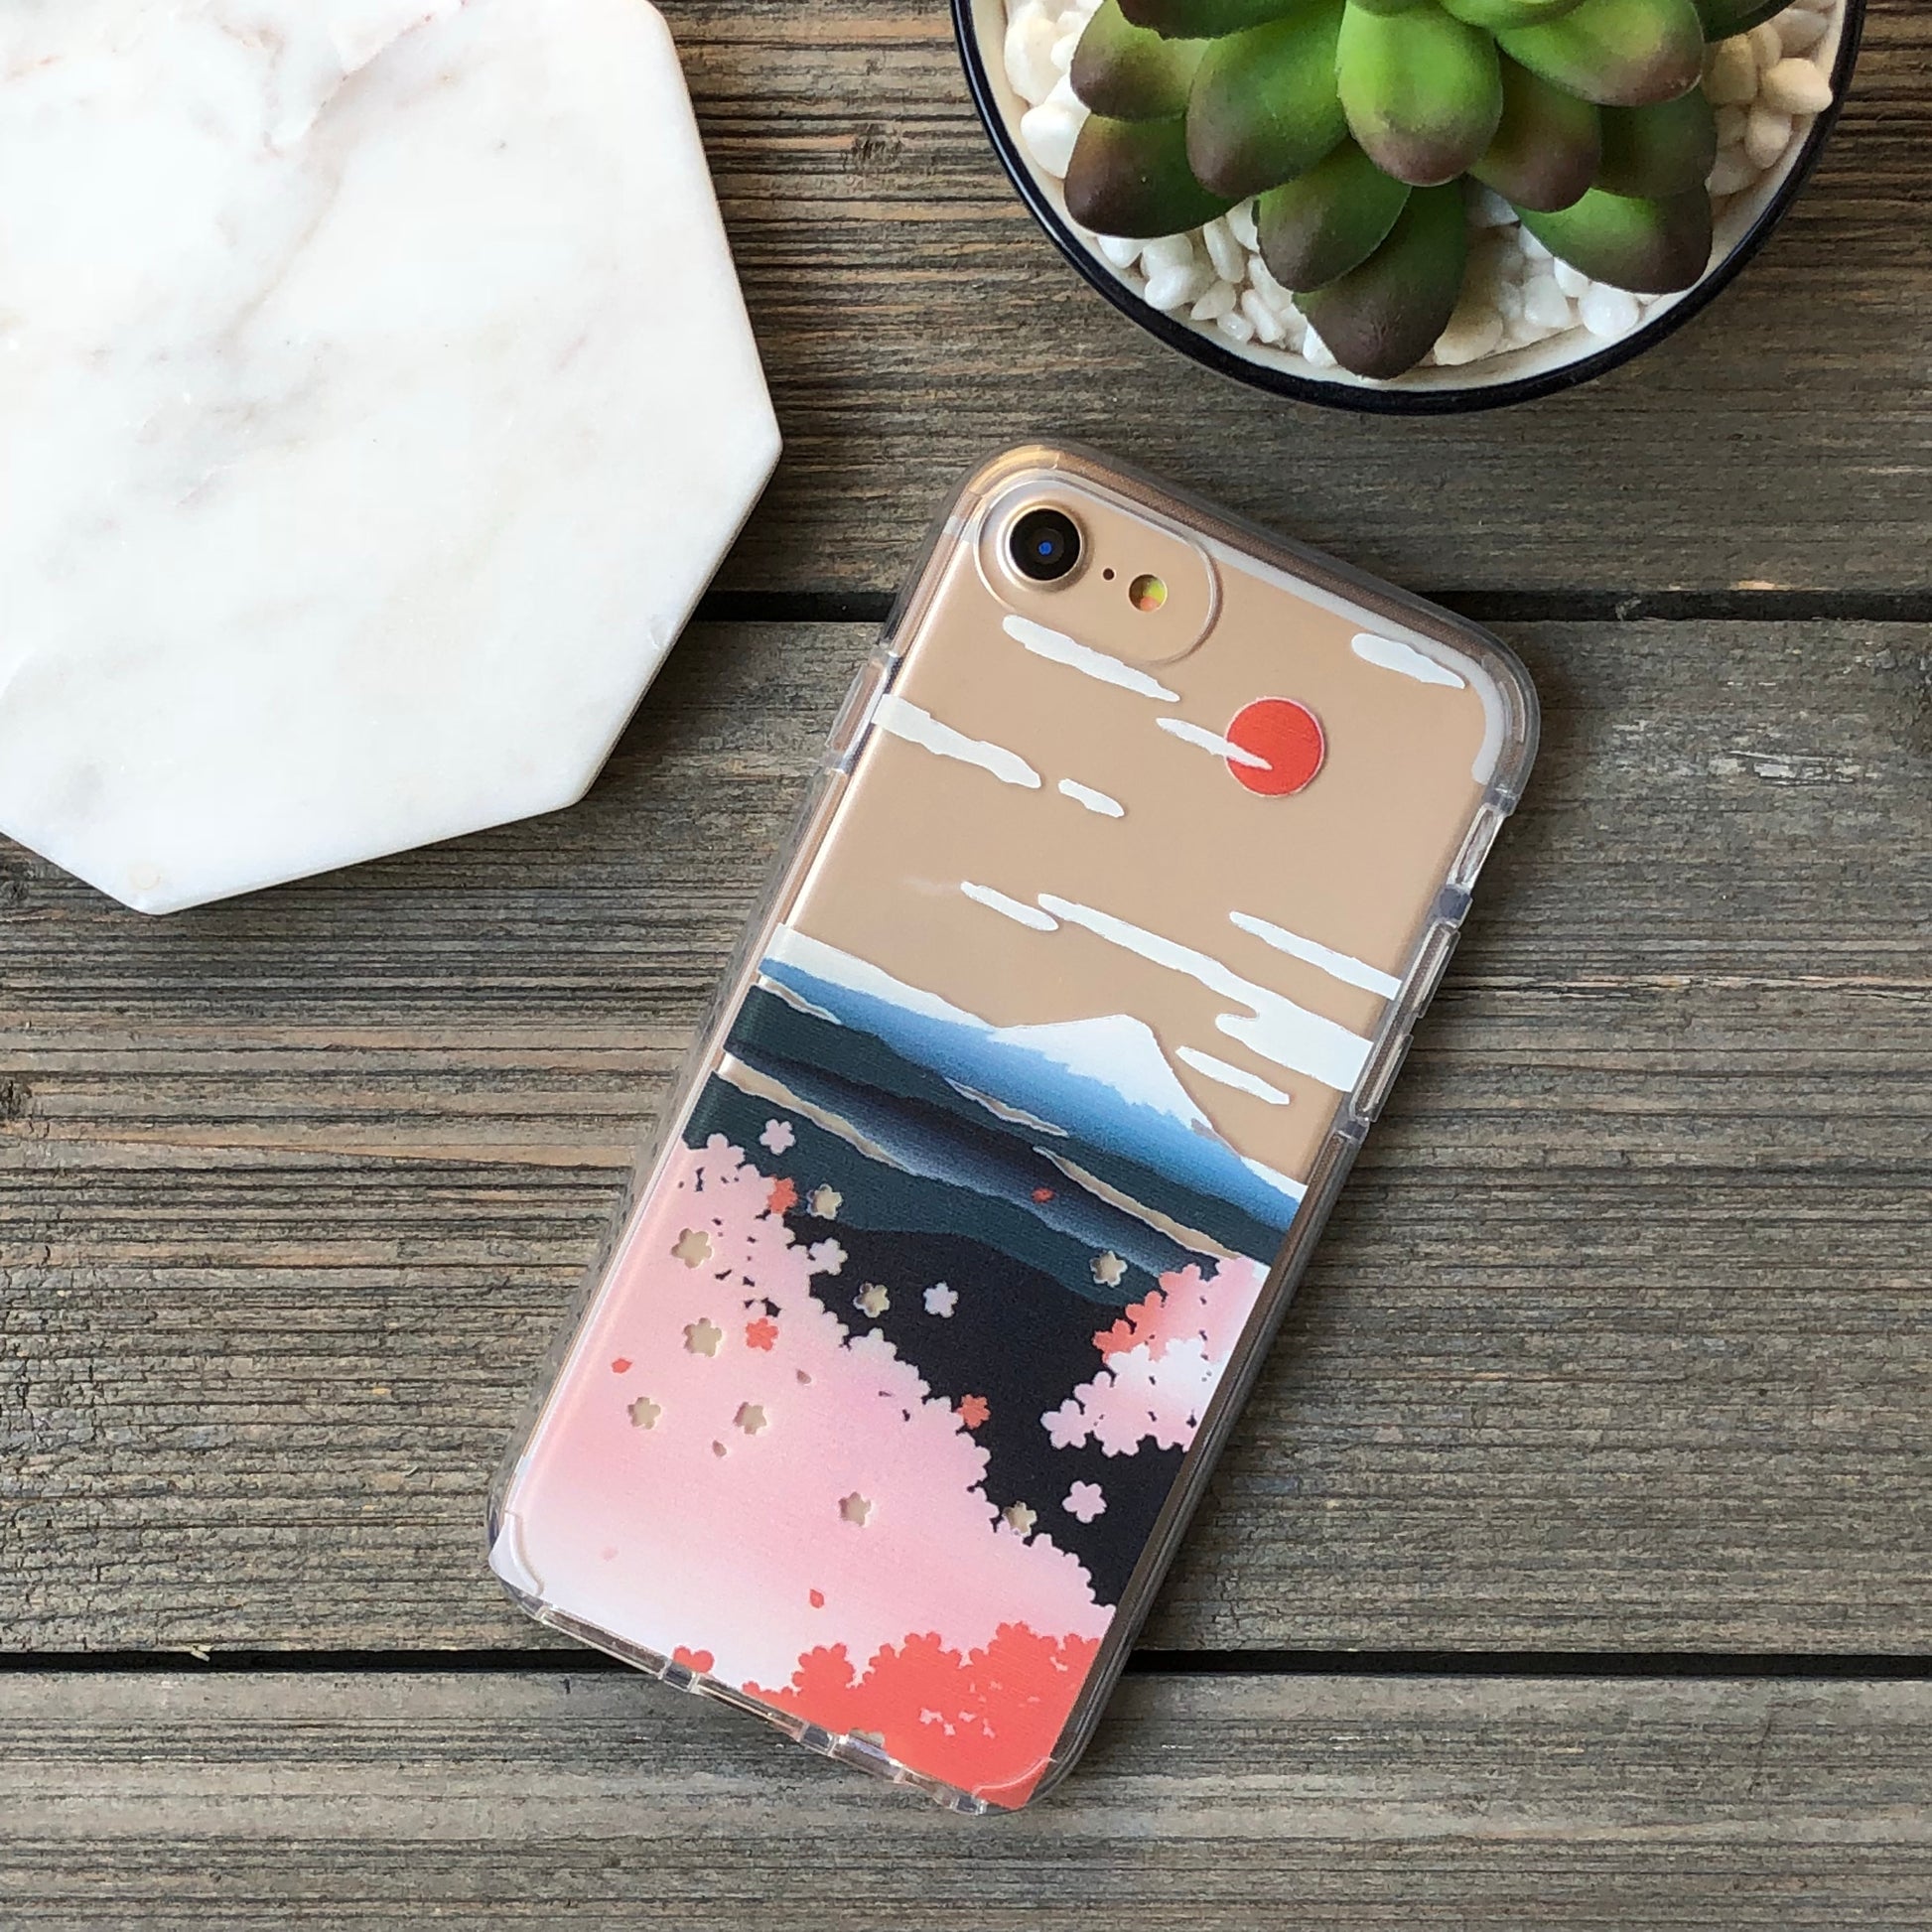 mount fuji and cherry blossoms phone case